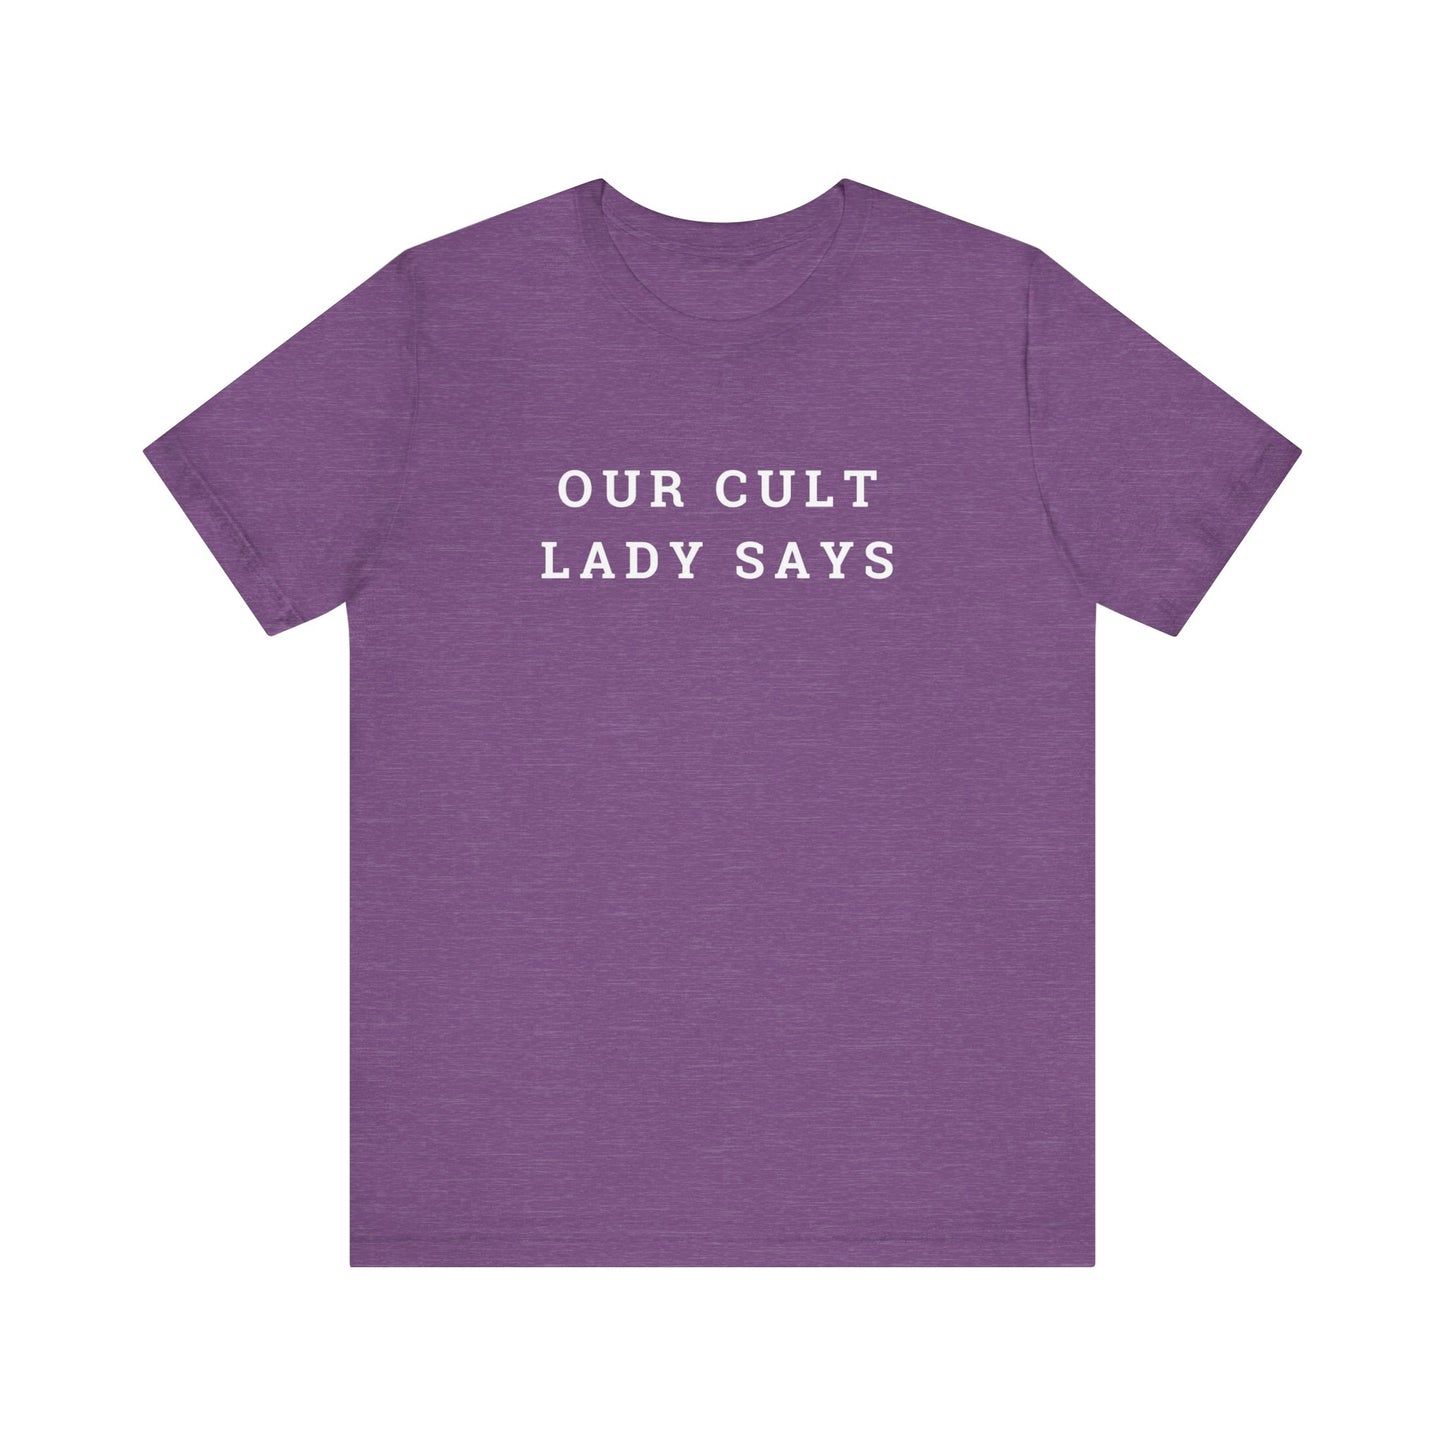 Our Cult Lady Says Copy of Unisex Jersey Short Sleeve Tee